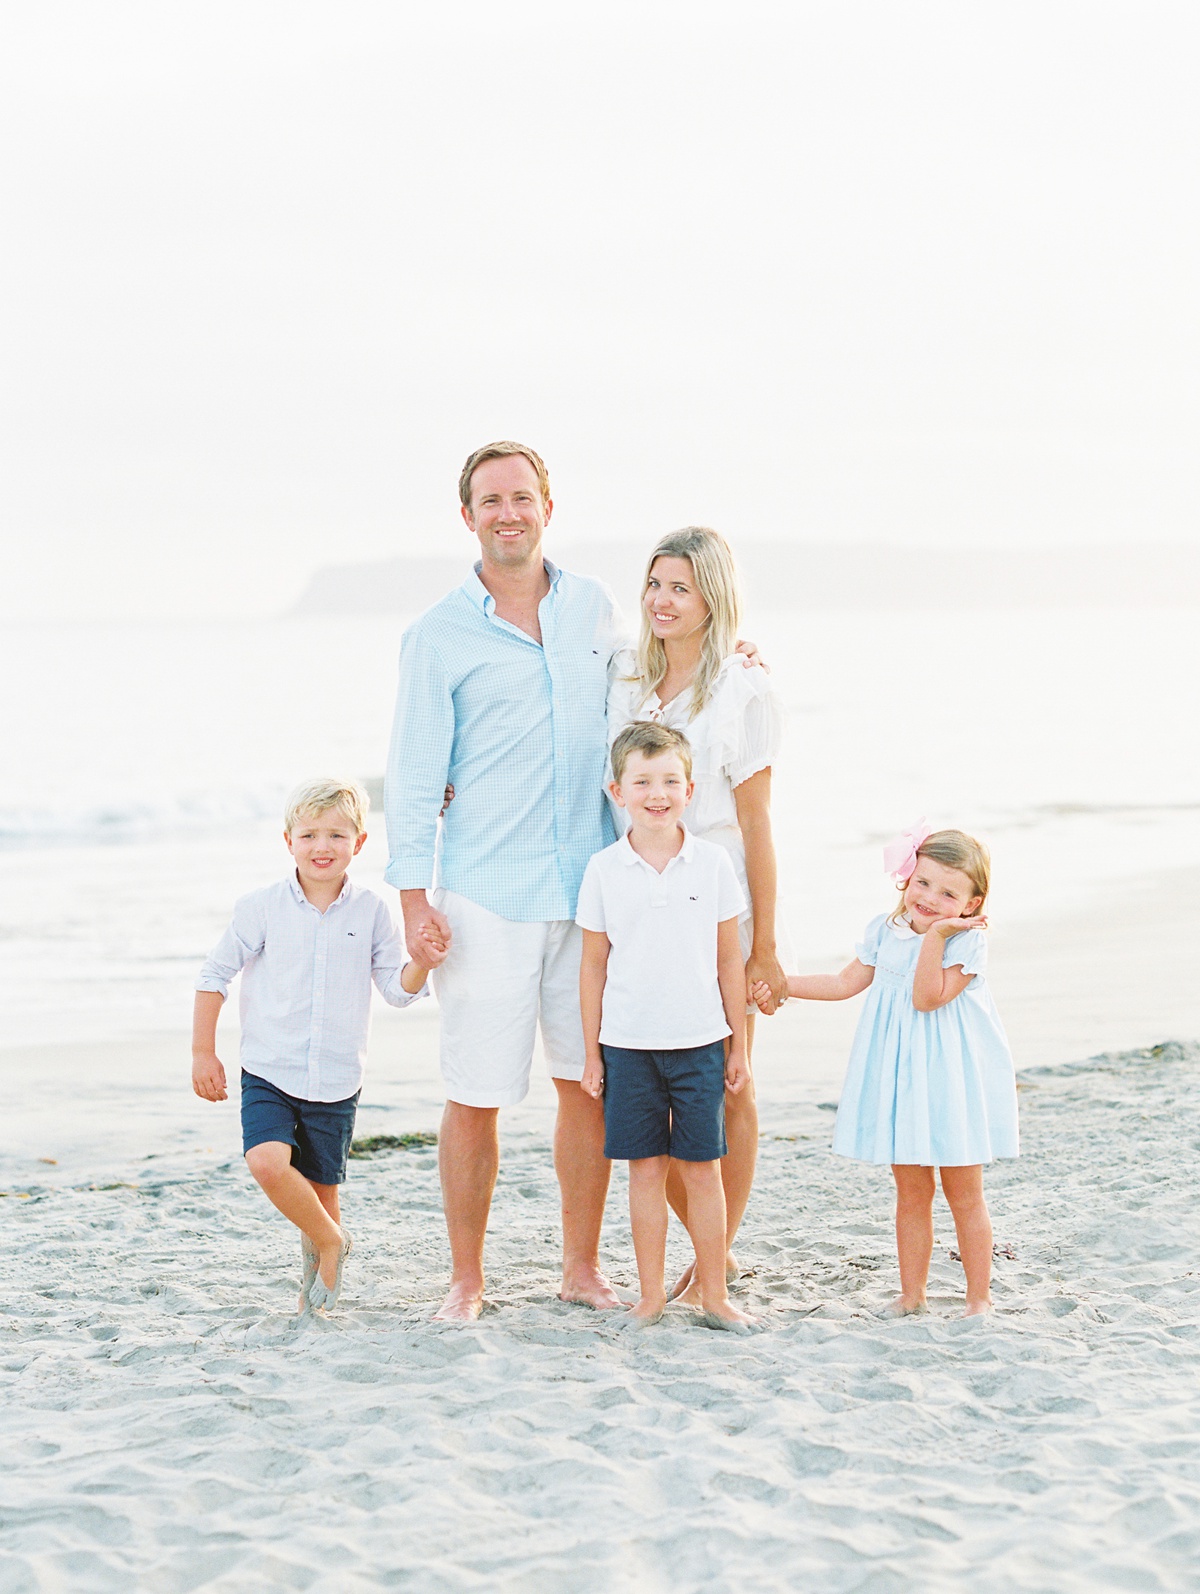 Beach Family Photo Outfit Inspiration | Coronado Family Photos Shot On Film By Mandy Ford Photography